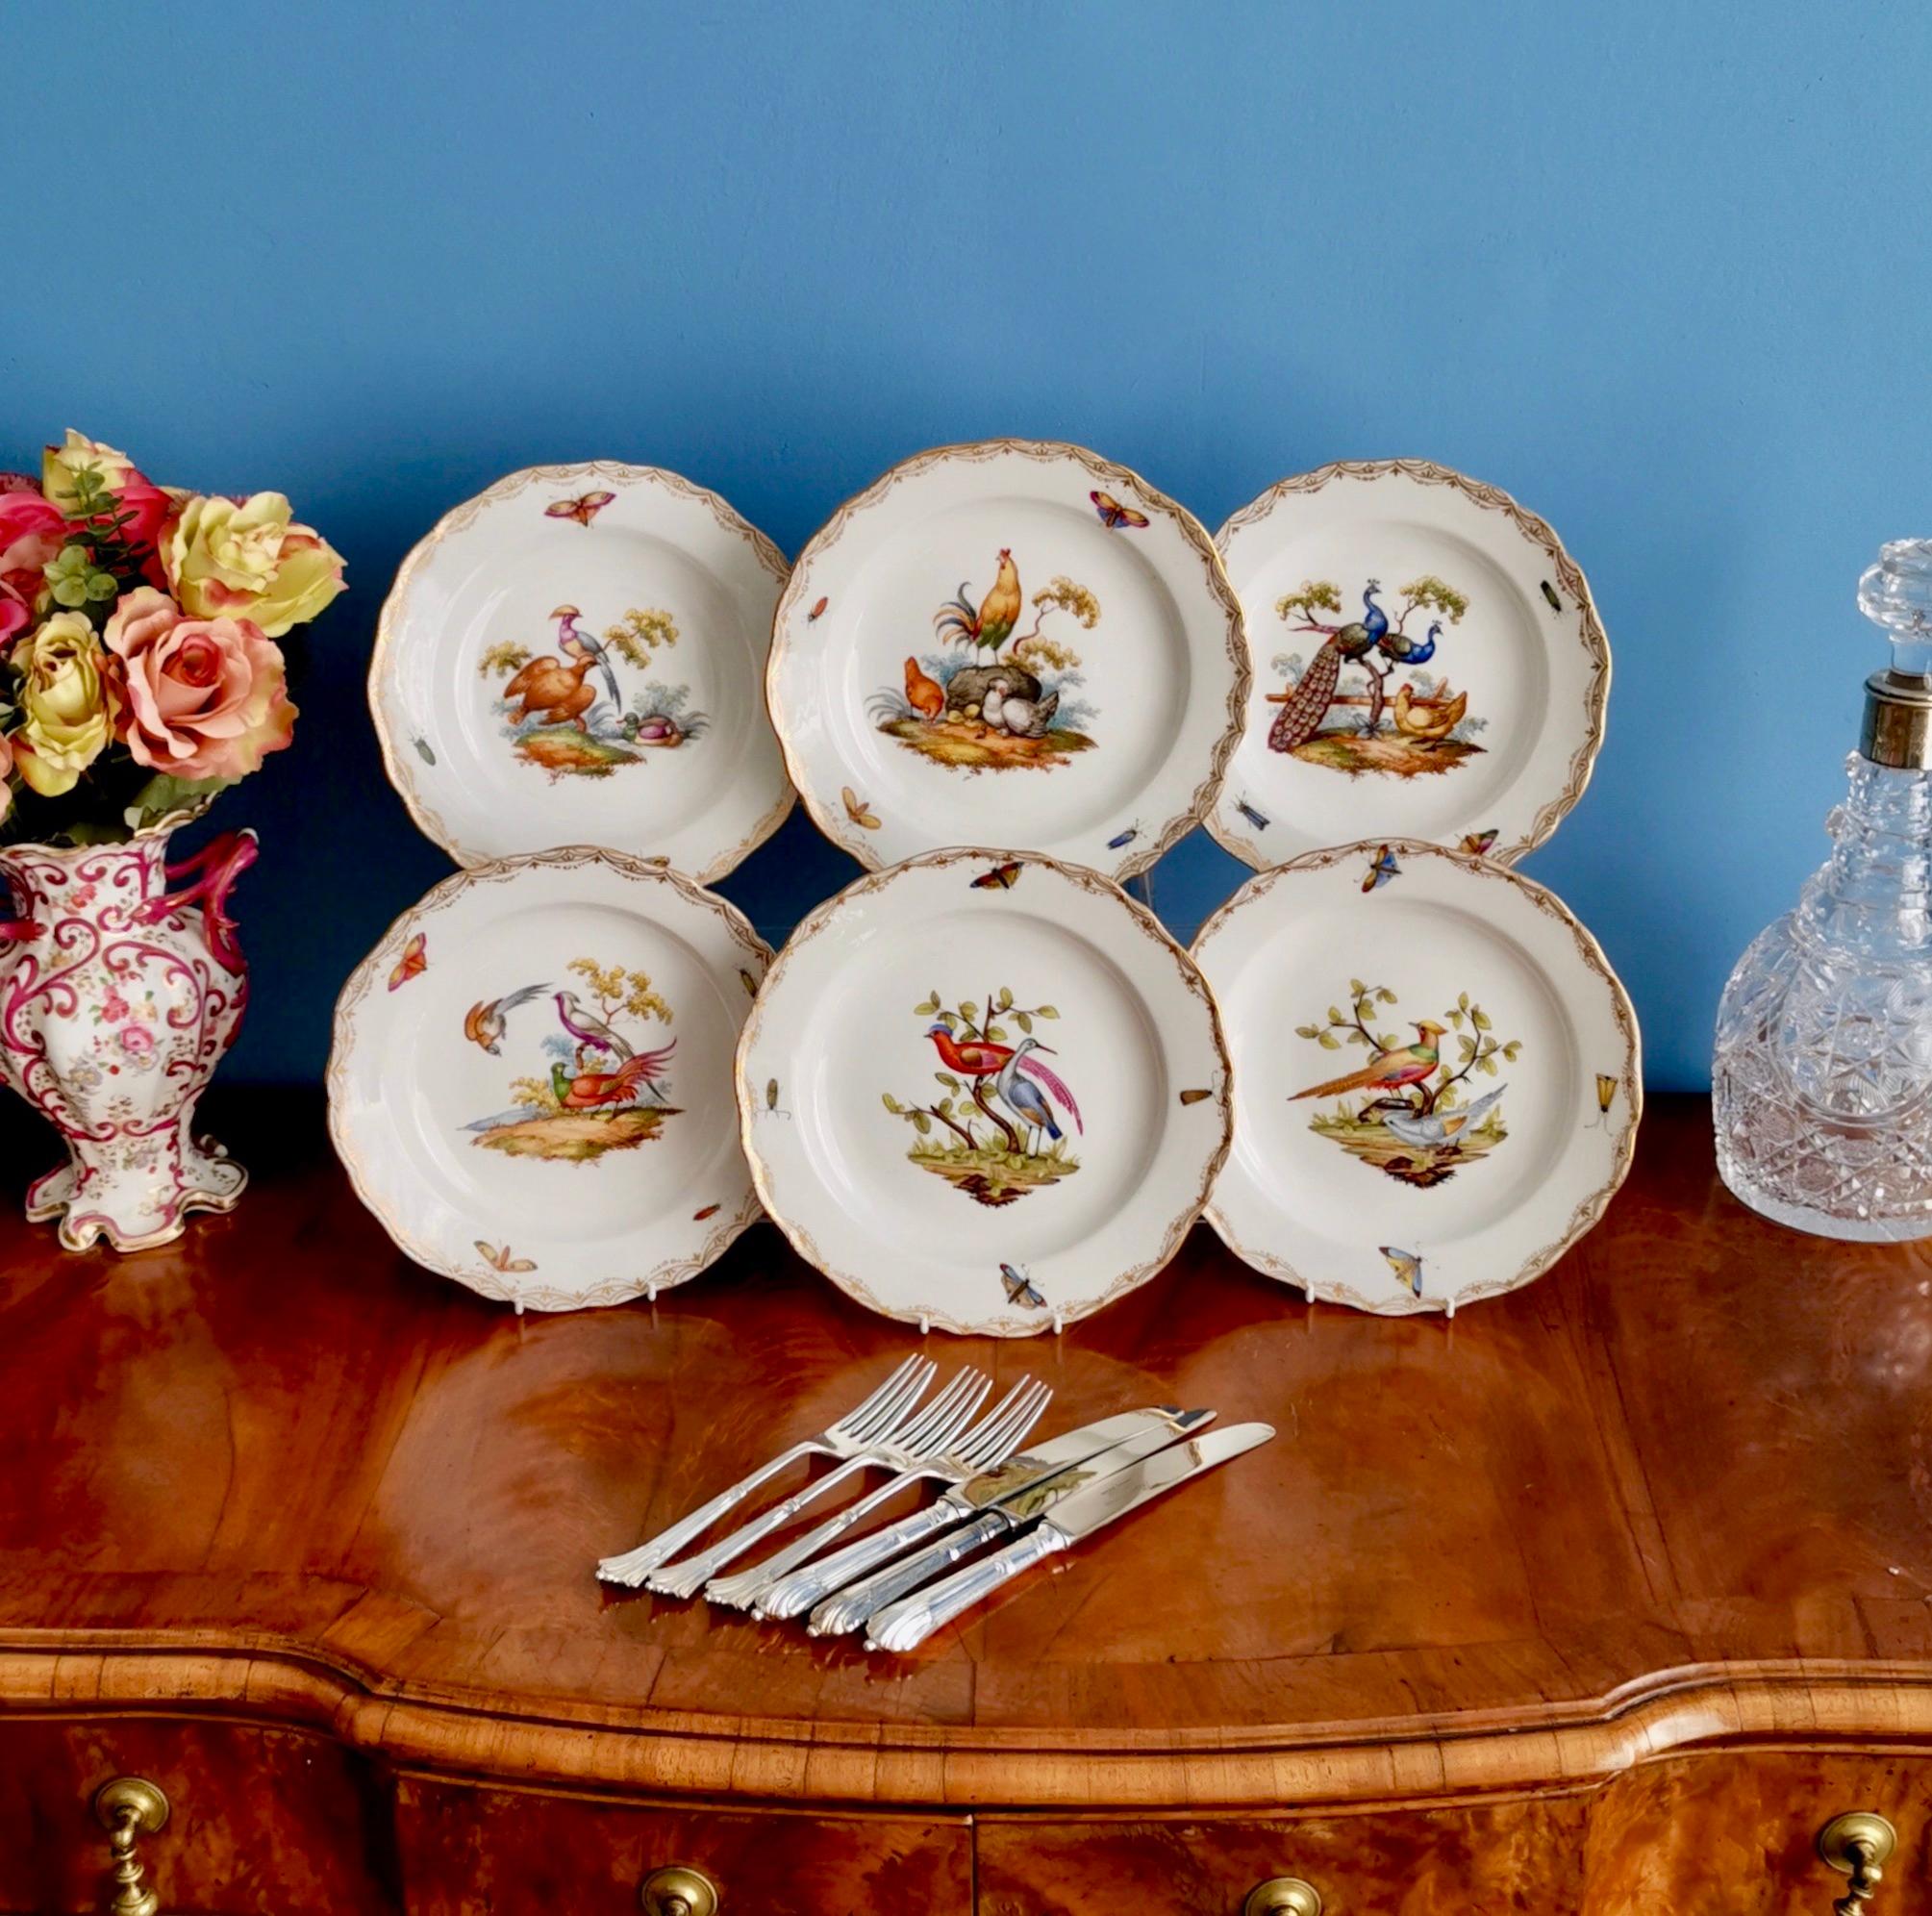 This is a beautiful and very charming set of 6 small dessert plates made by Meissen between 1852 and 1870. Two of the six plates are slightly smaller than the others, but they all have the same shape, rim pattern and style so they perfectly look